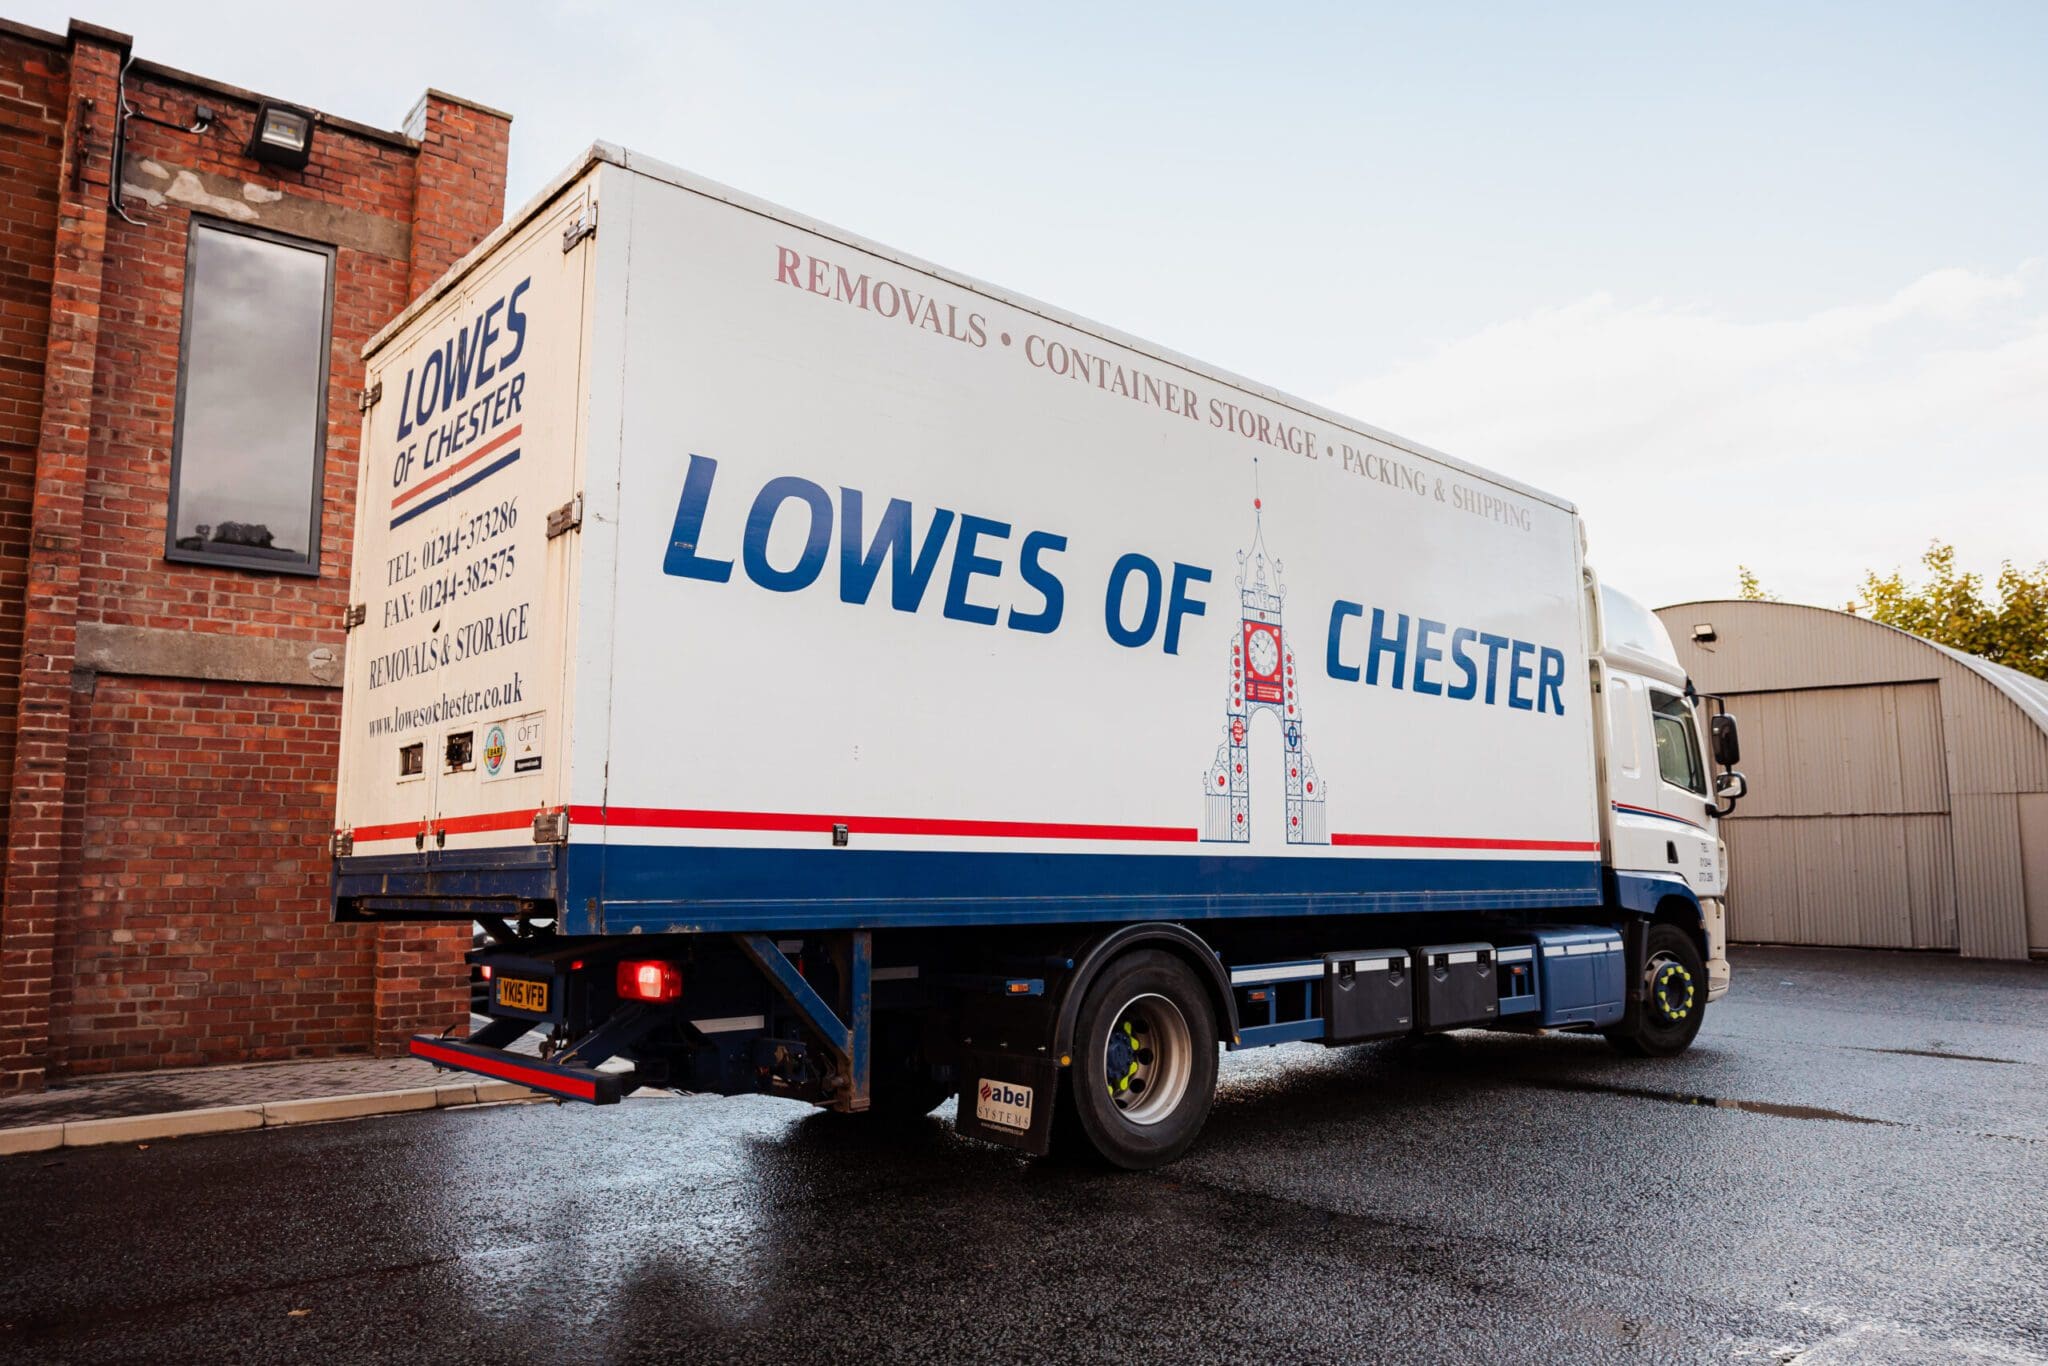 Lowes of Chester truck